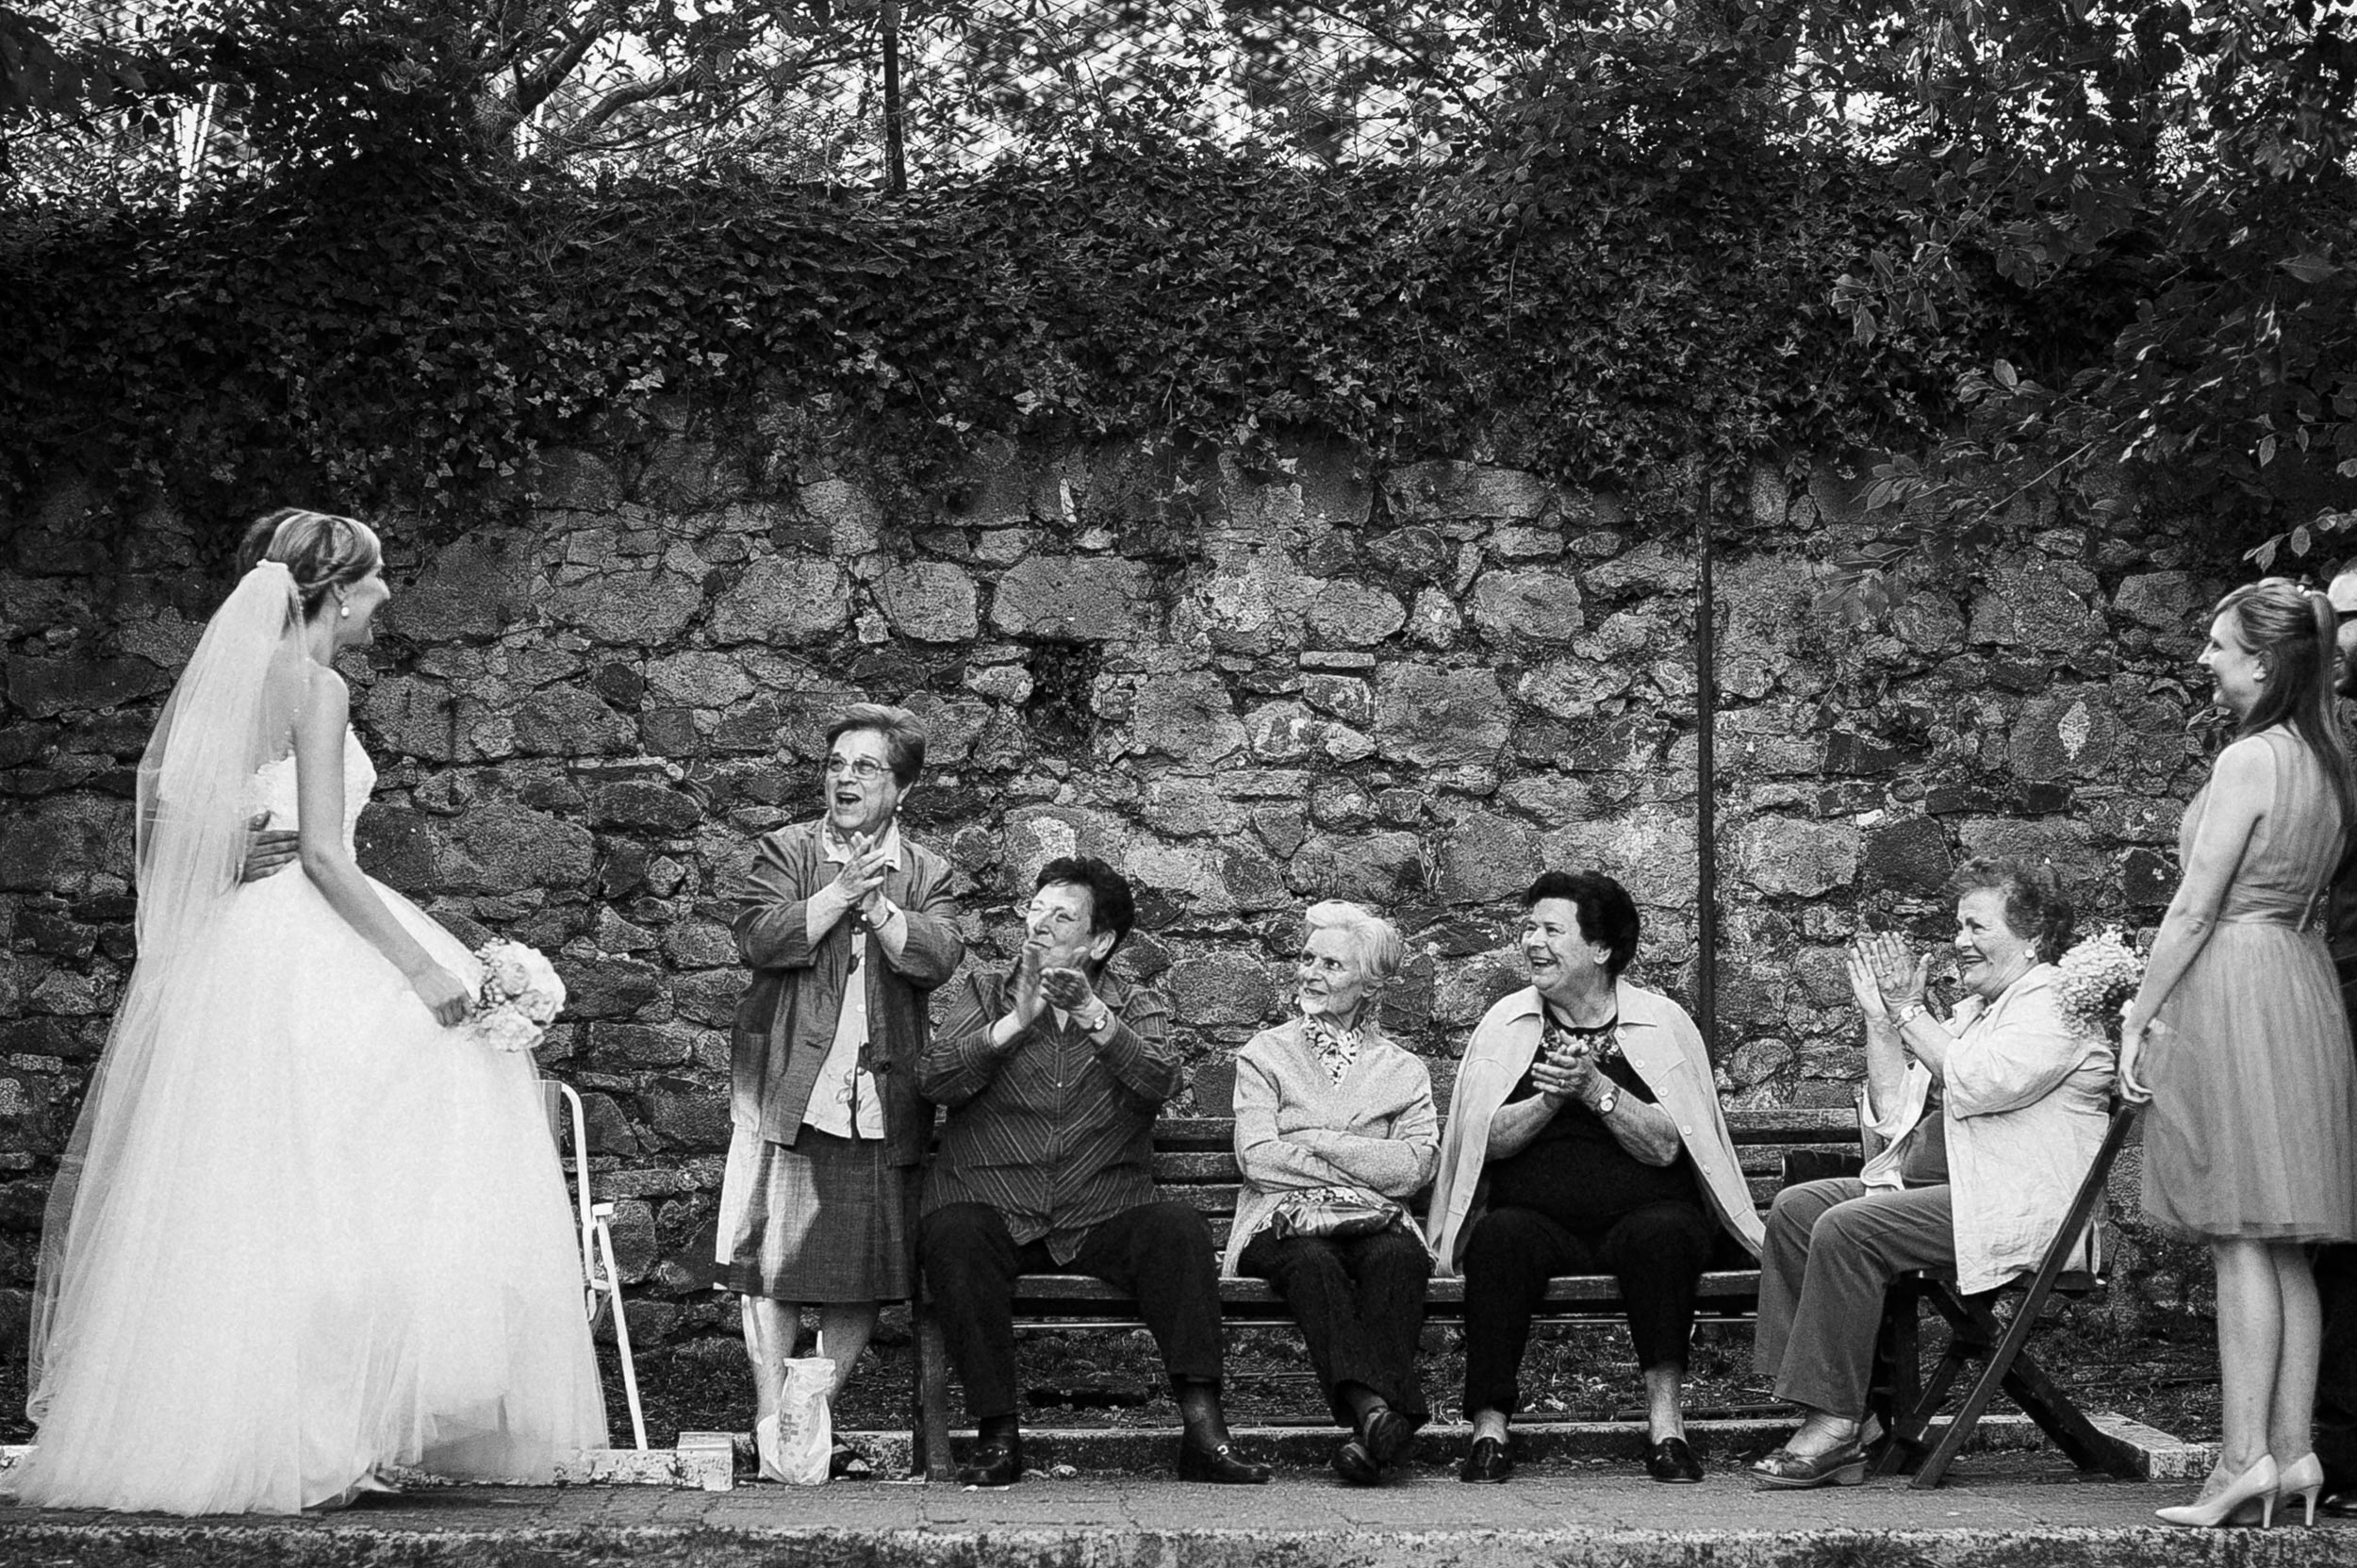 bride-and-groom-meet-old-ladies-wedding-in-italy-local-people-black-and-white-wedding-photography.jpg